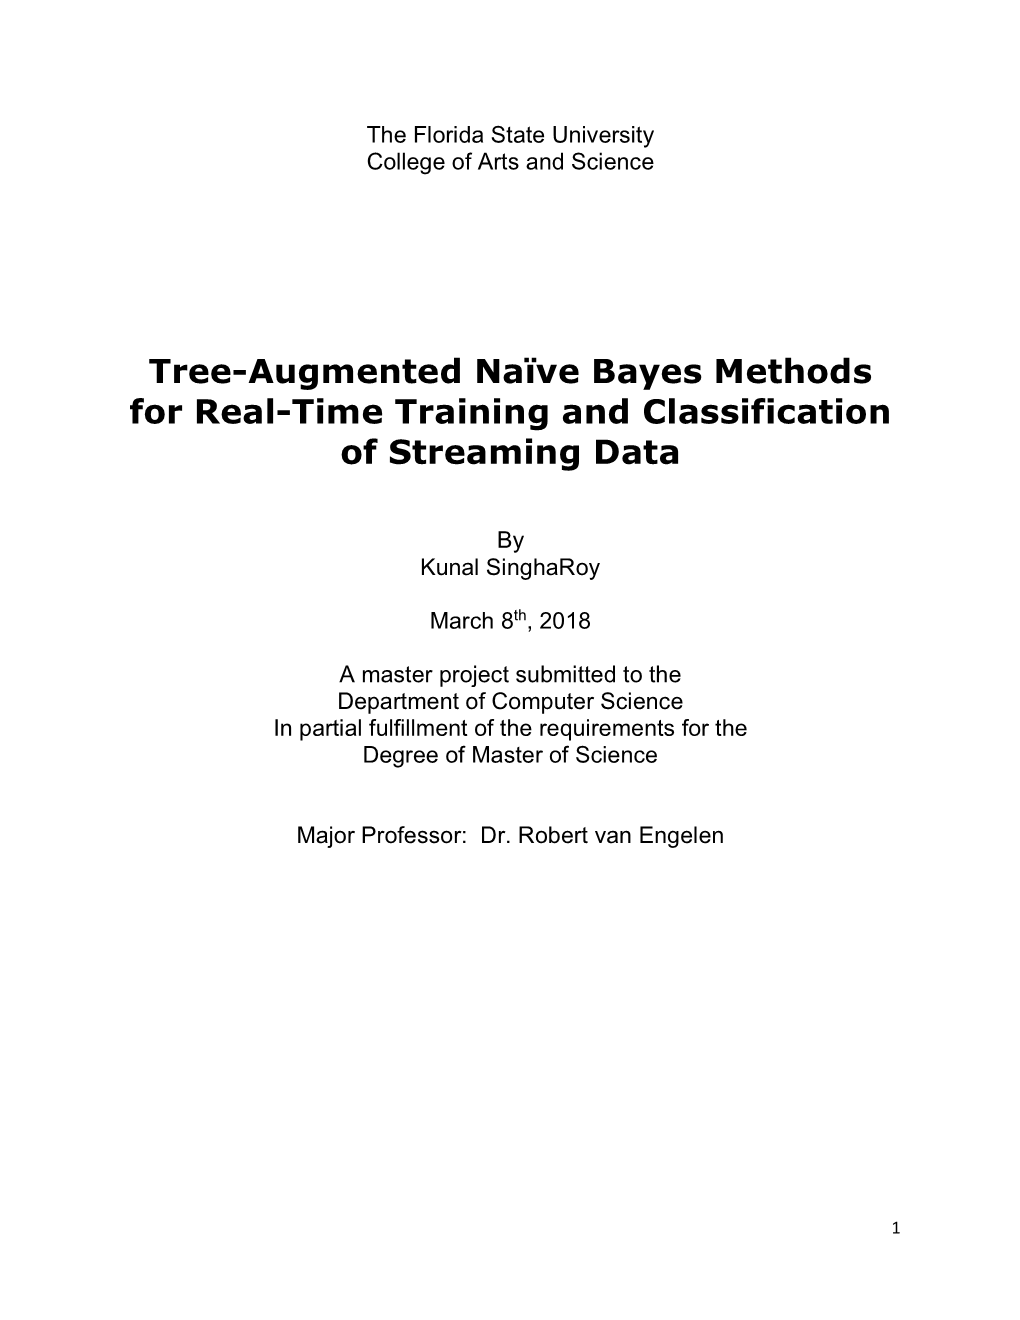 Tree-Augmented Naive Bayes Methods for Real-Time Training